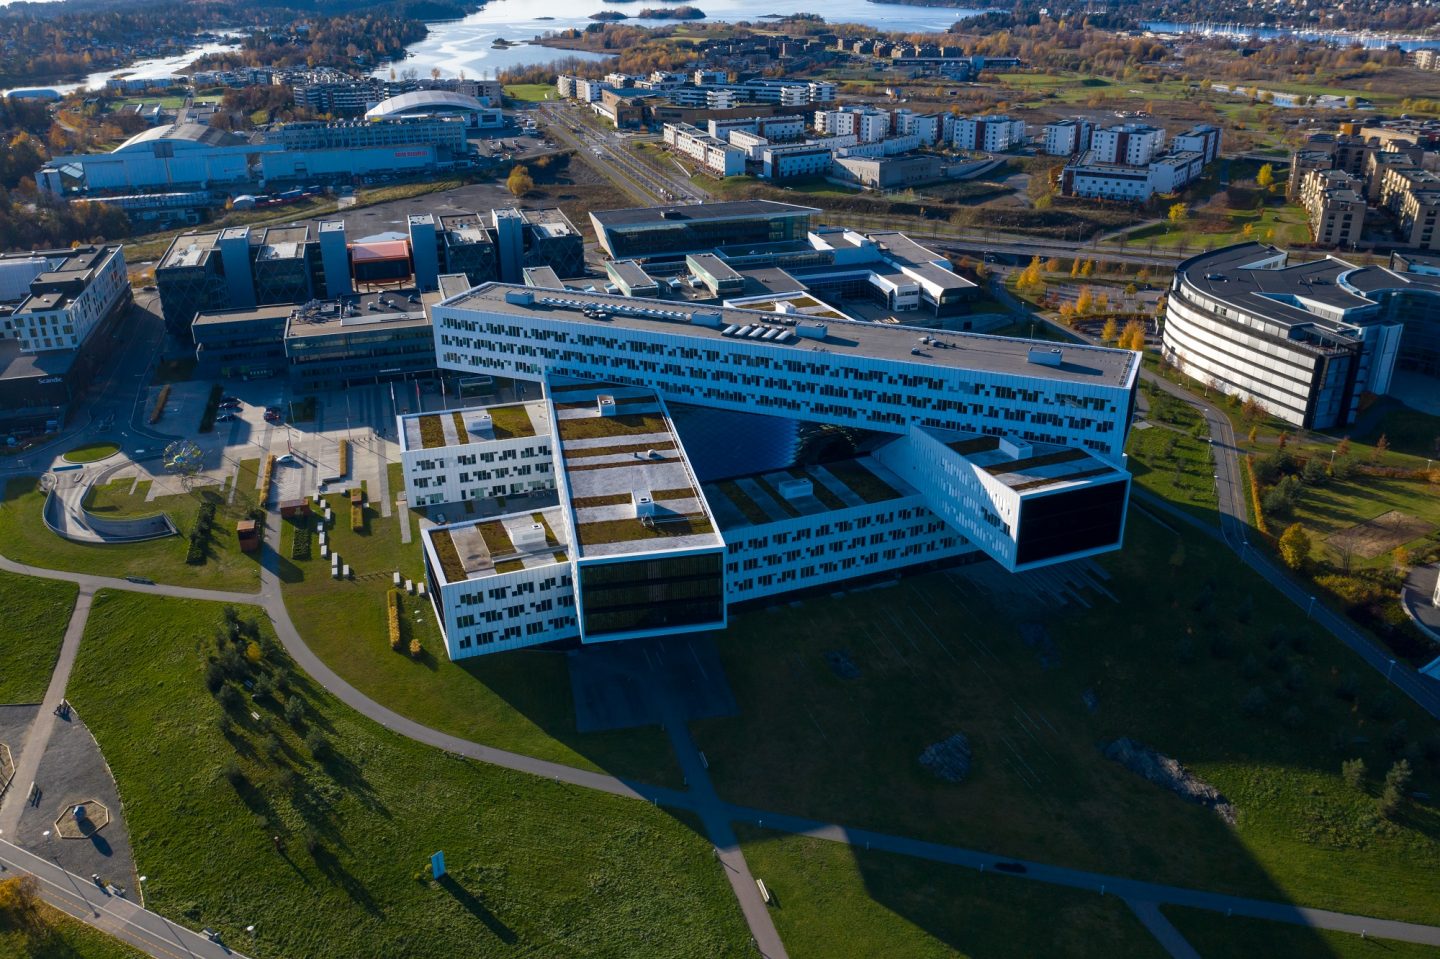 Equinor's corporate offices in Fornebu, Norway